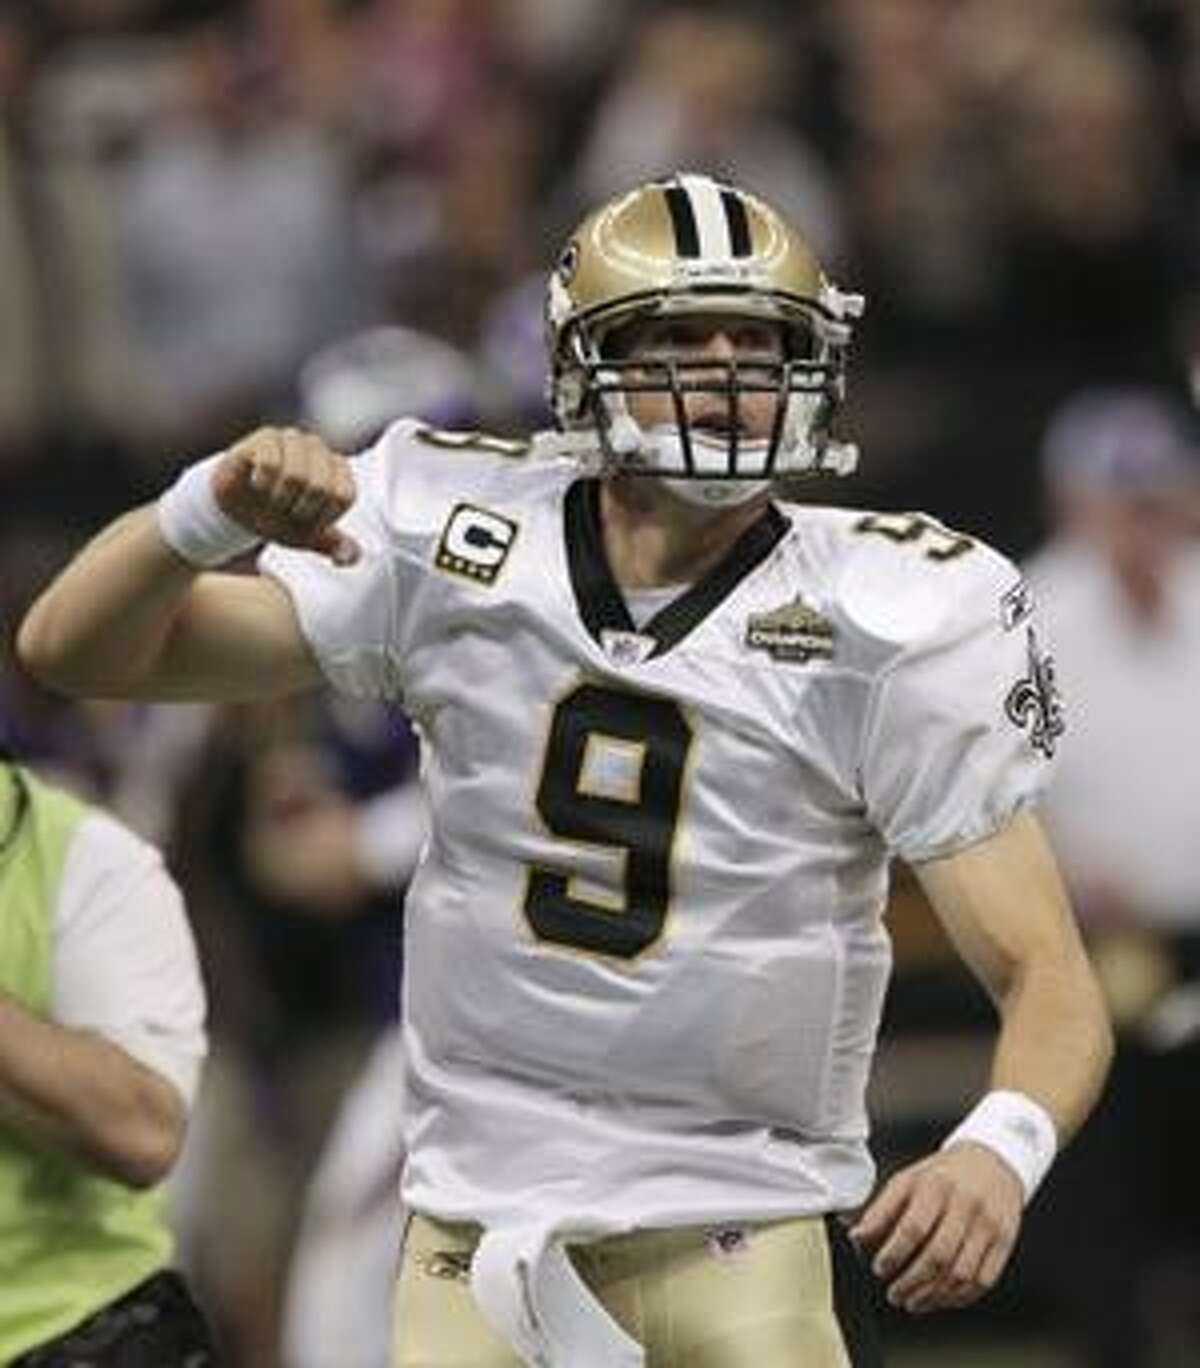 New Orleans Saints quarterback Drew Brees leads the crowd in a "Who Dat" cheer prior to an NFL football game against the Minnesota Vikings in New Orleans, Thursday, Sept. 9, 2010. (AP Photo/Dave Martin)